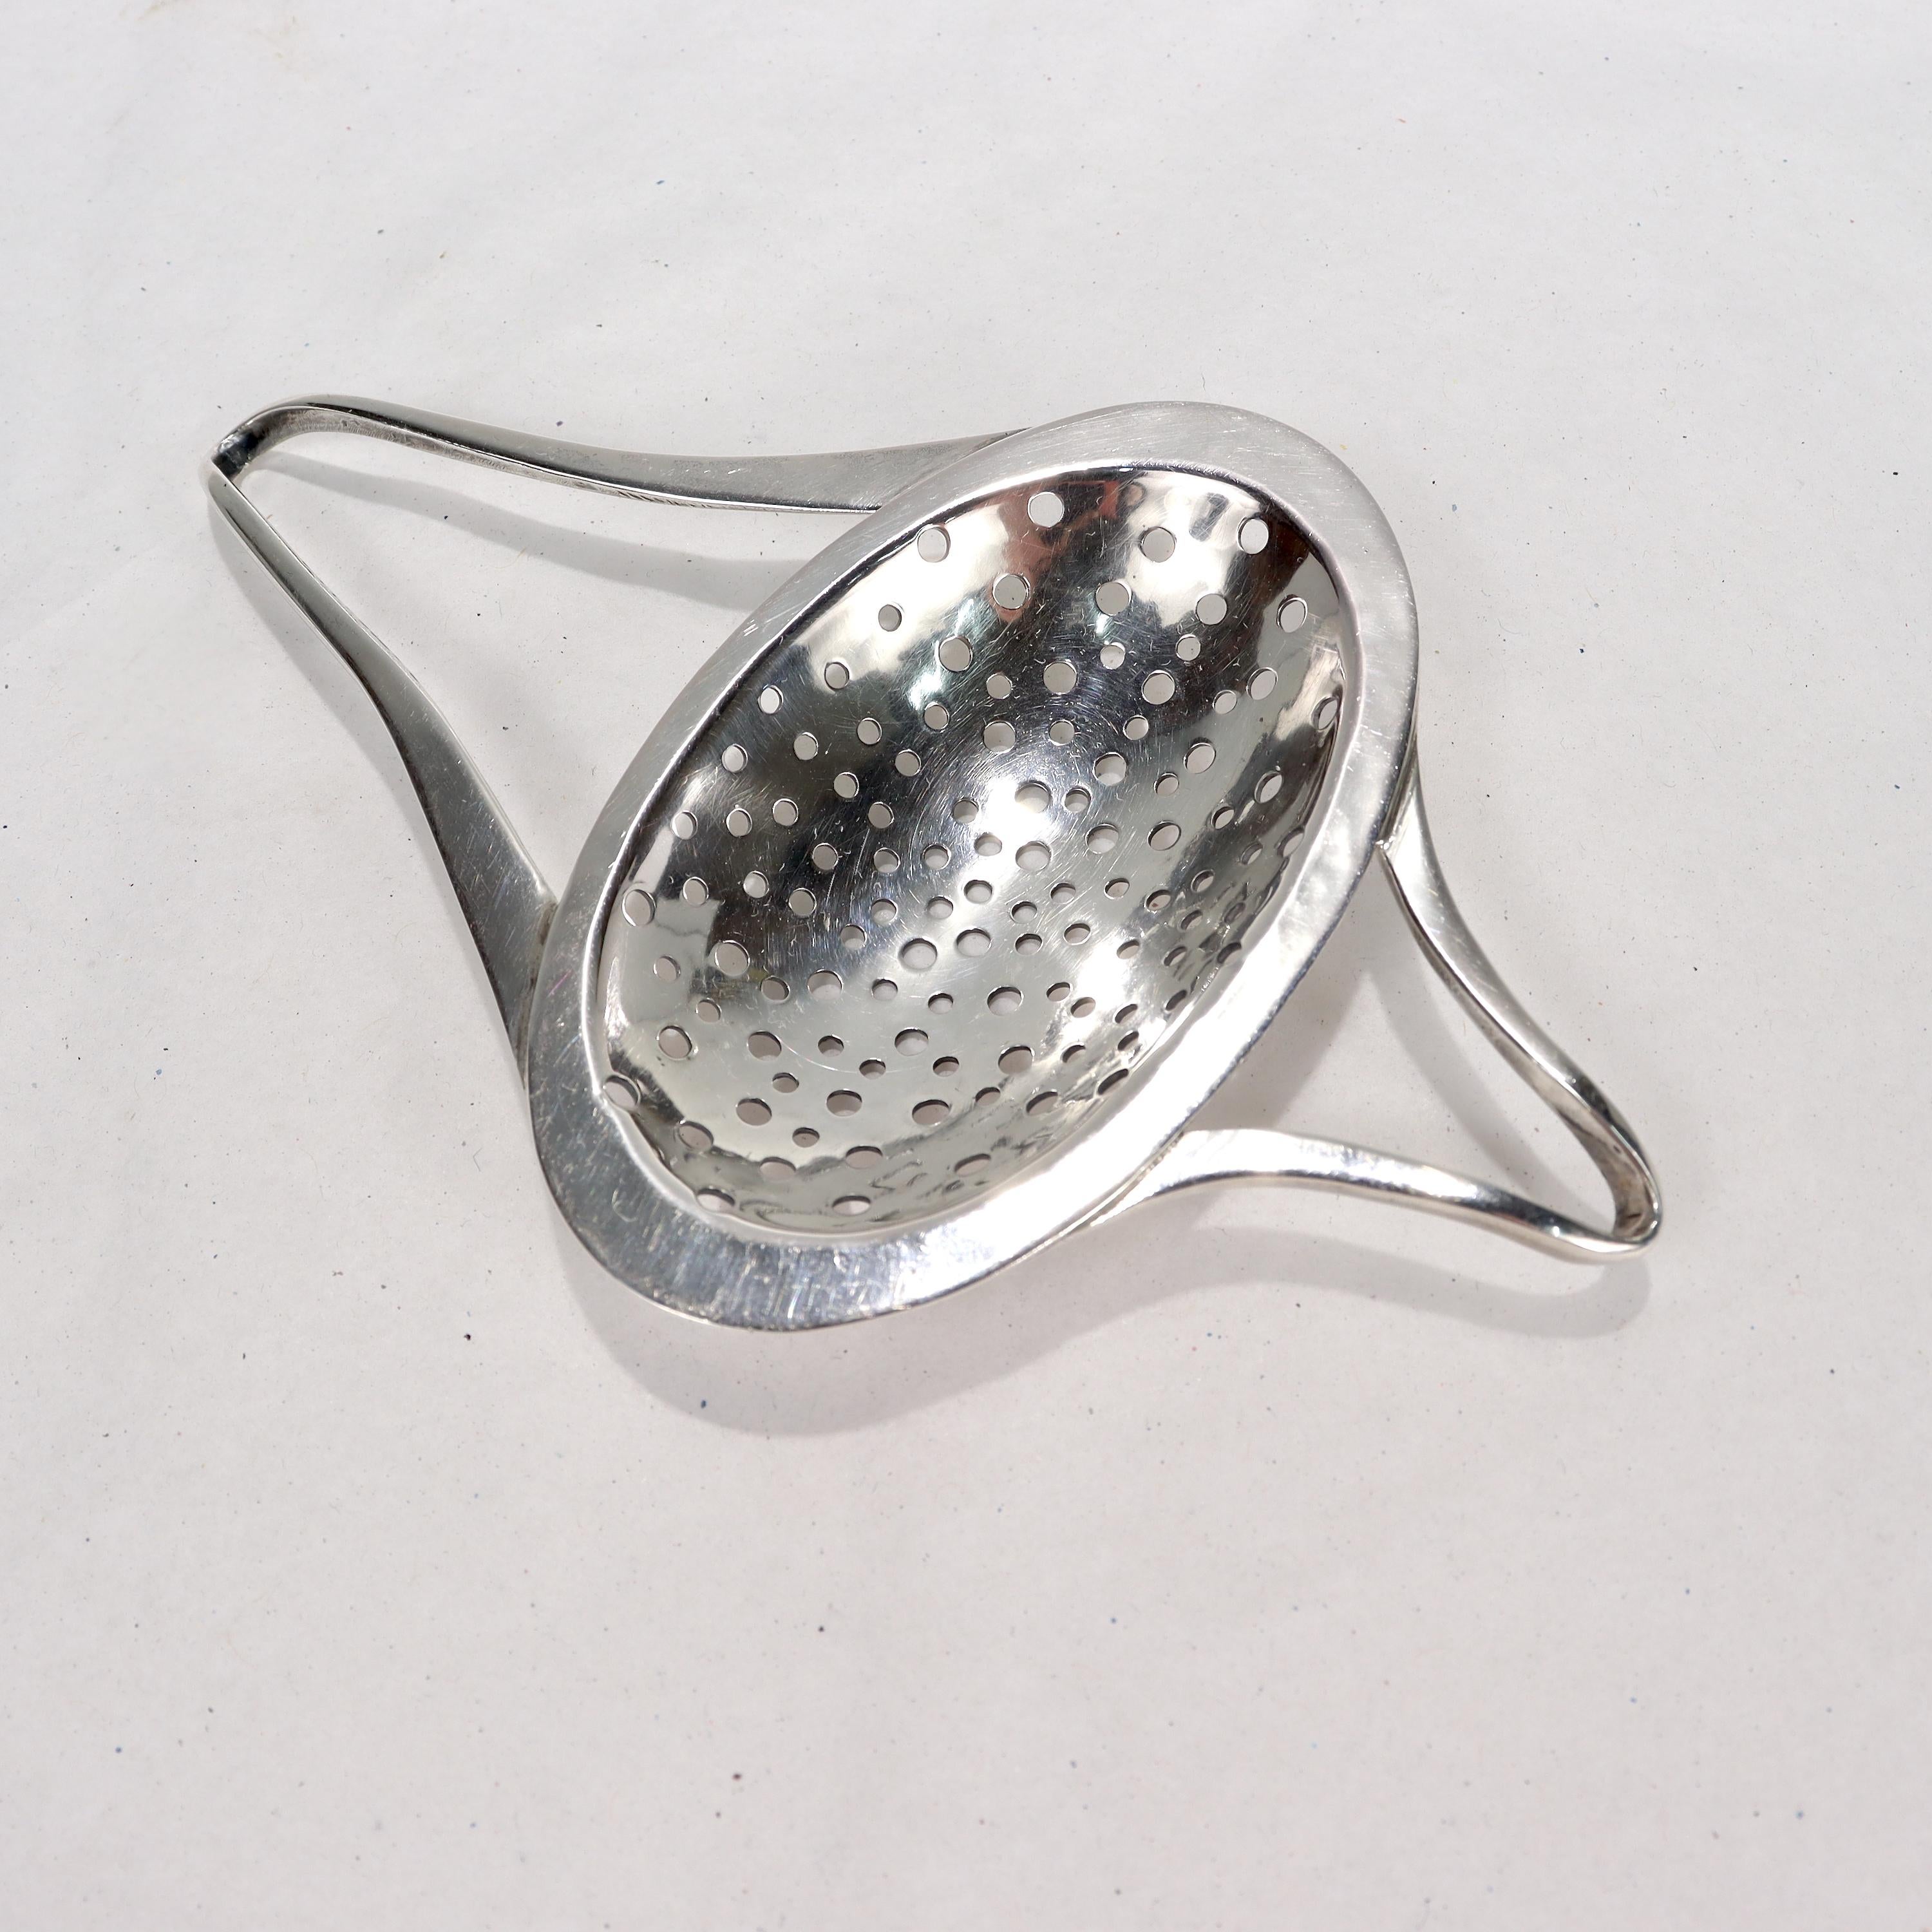 Offered here for your consideration is, A fine Mid-Century Modern hand-crafted tea strainer.

In sterling silver.

By Alexandra Solowij Watkins. Solowij Watkins is a renowned Polish-American female silversmith. After training in Montreal she was